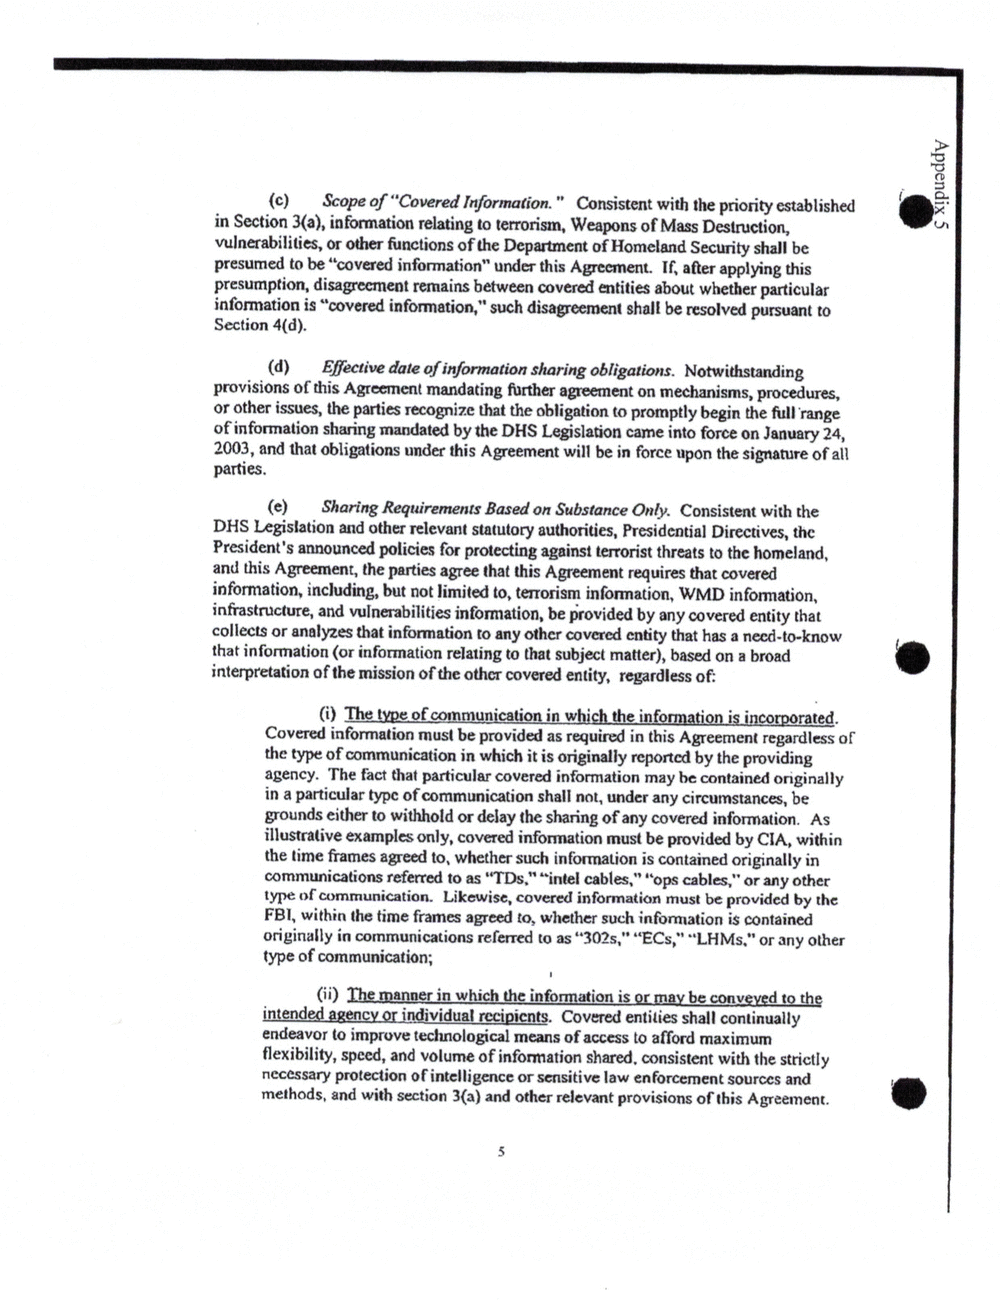 Page 111 from March 2013 Watchlisting Guidance